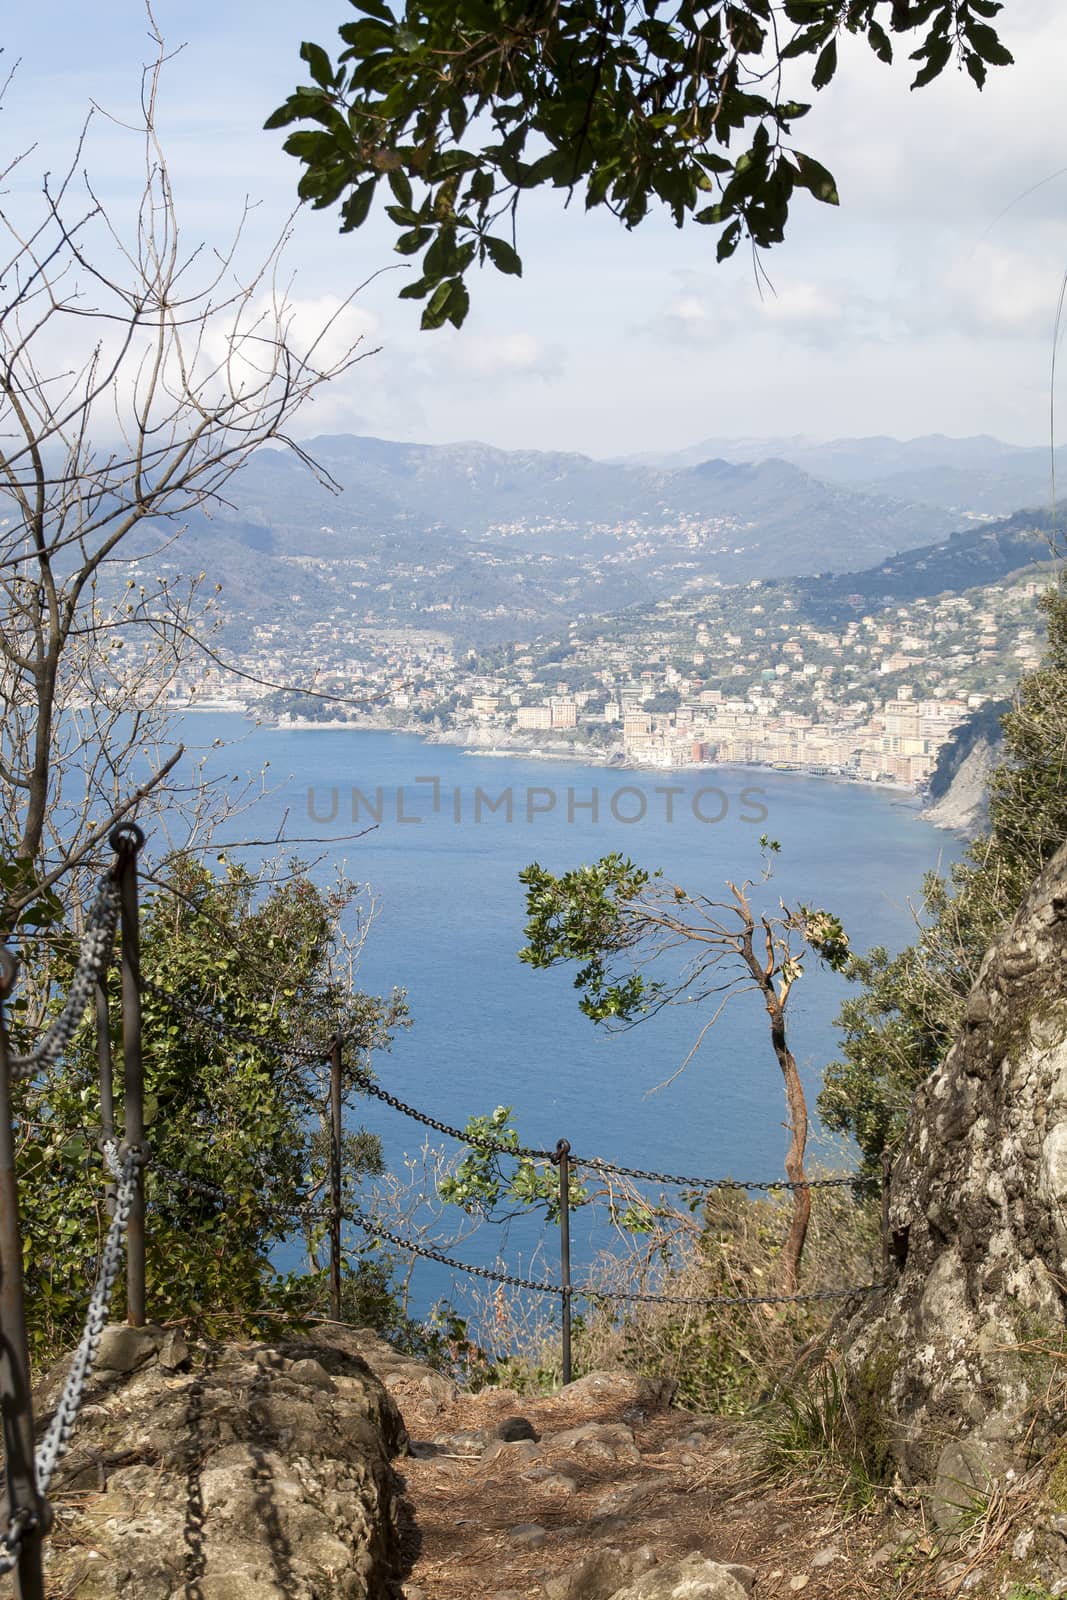 trekking on a path of the natural park of Portofino in Liguria